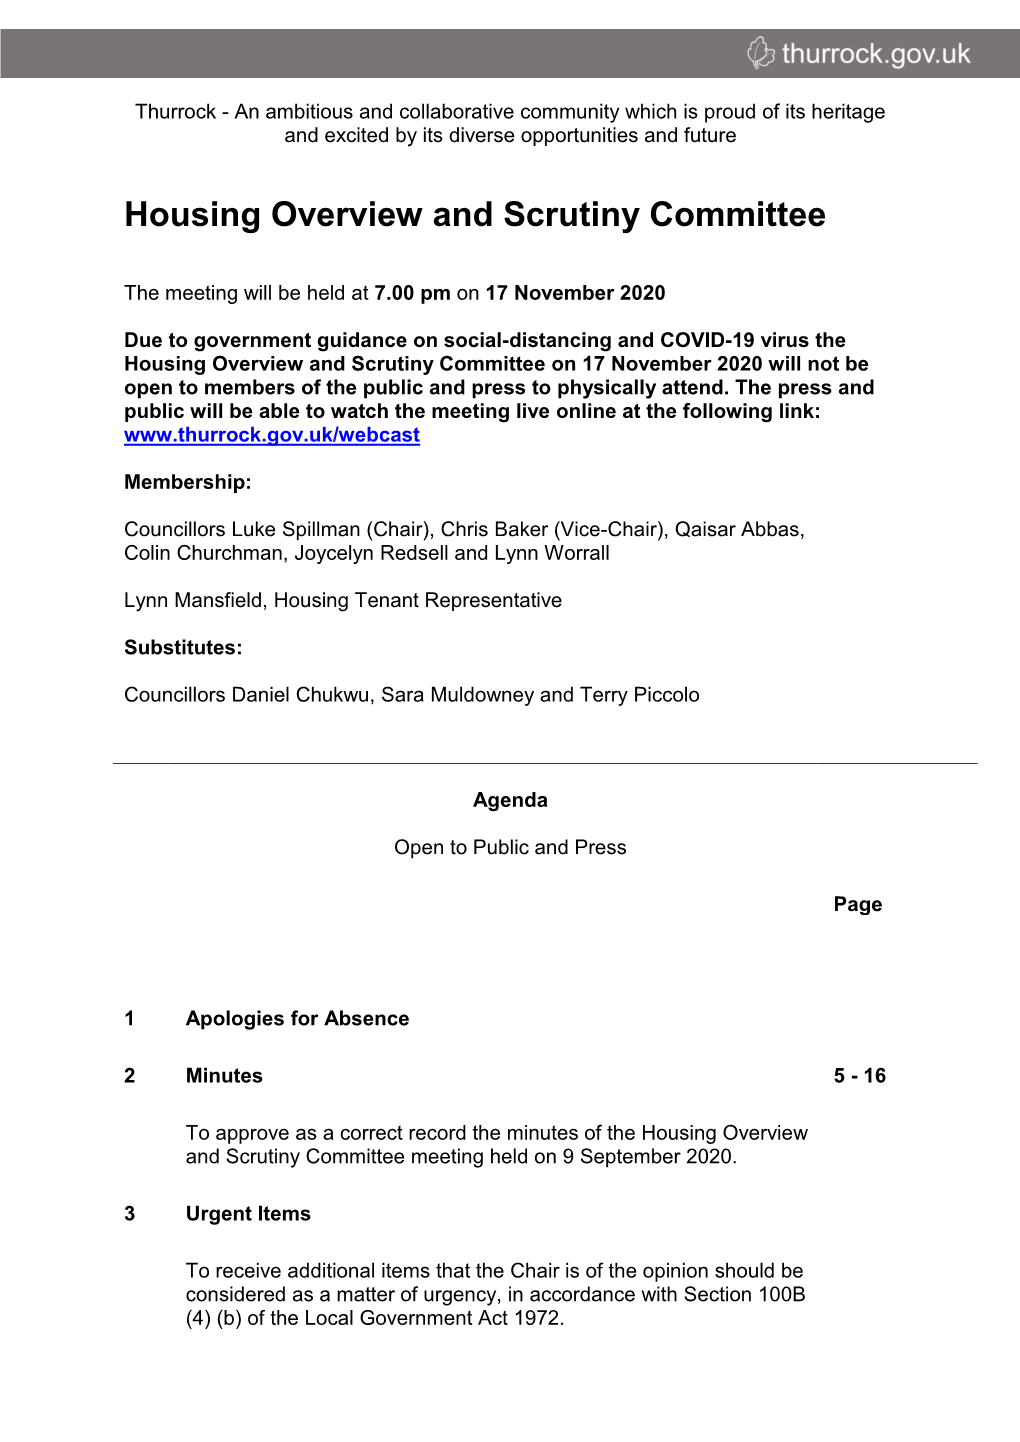 (Public Pack)Agenda Document for Housing Overview and Scrutiny